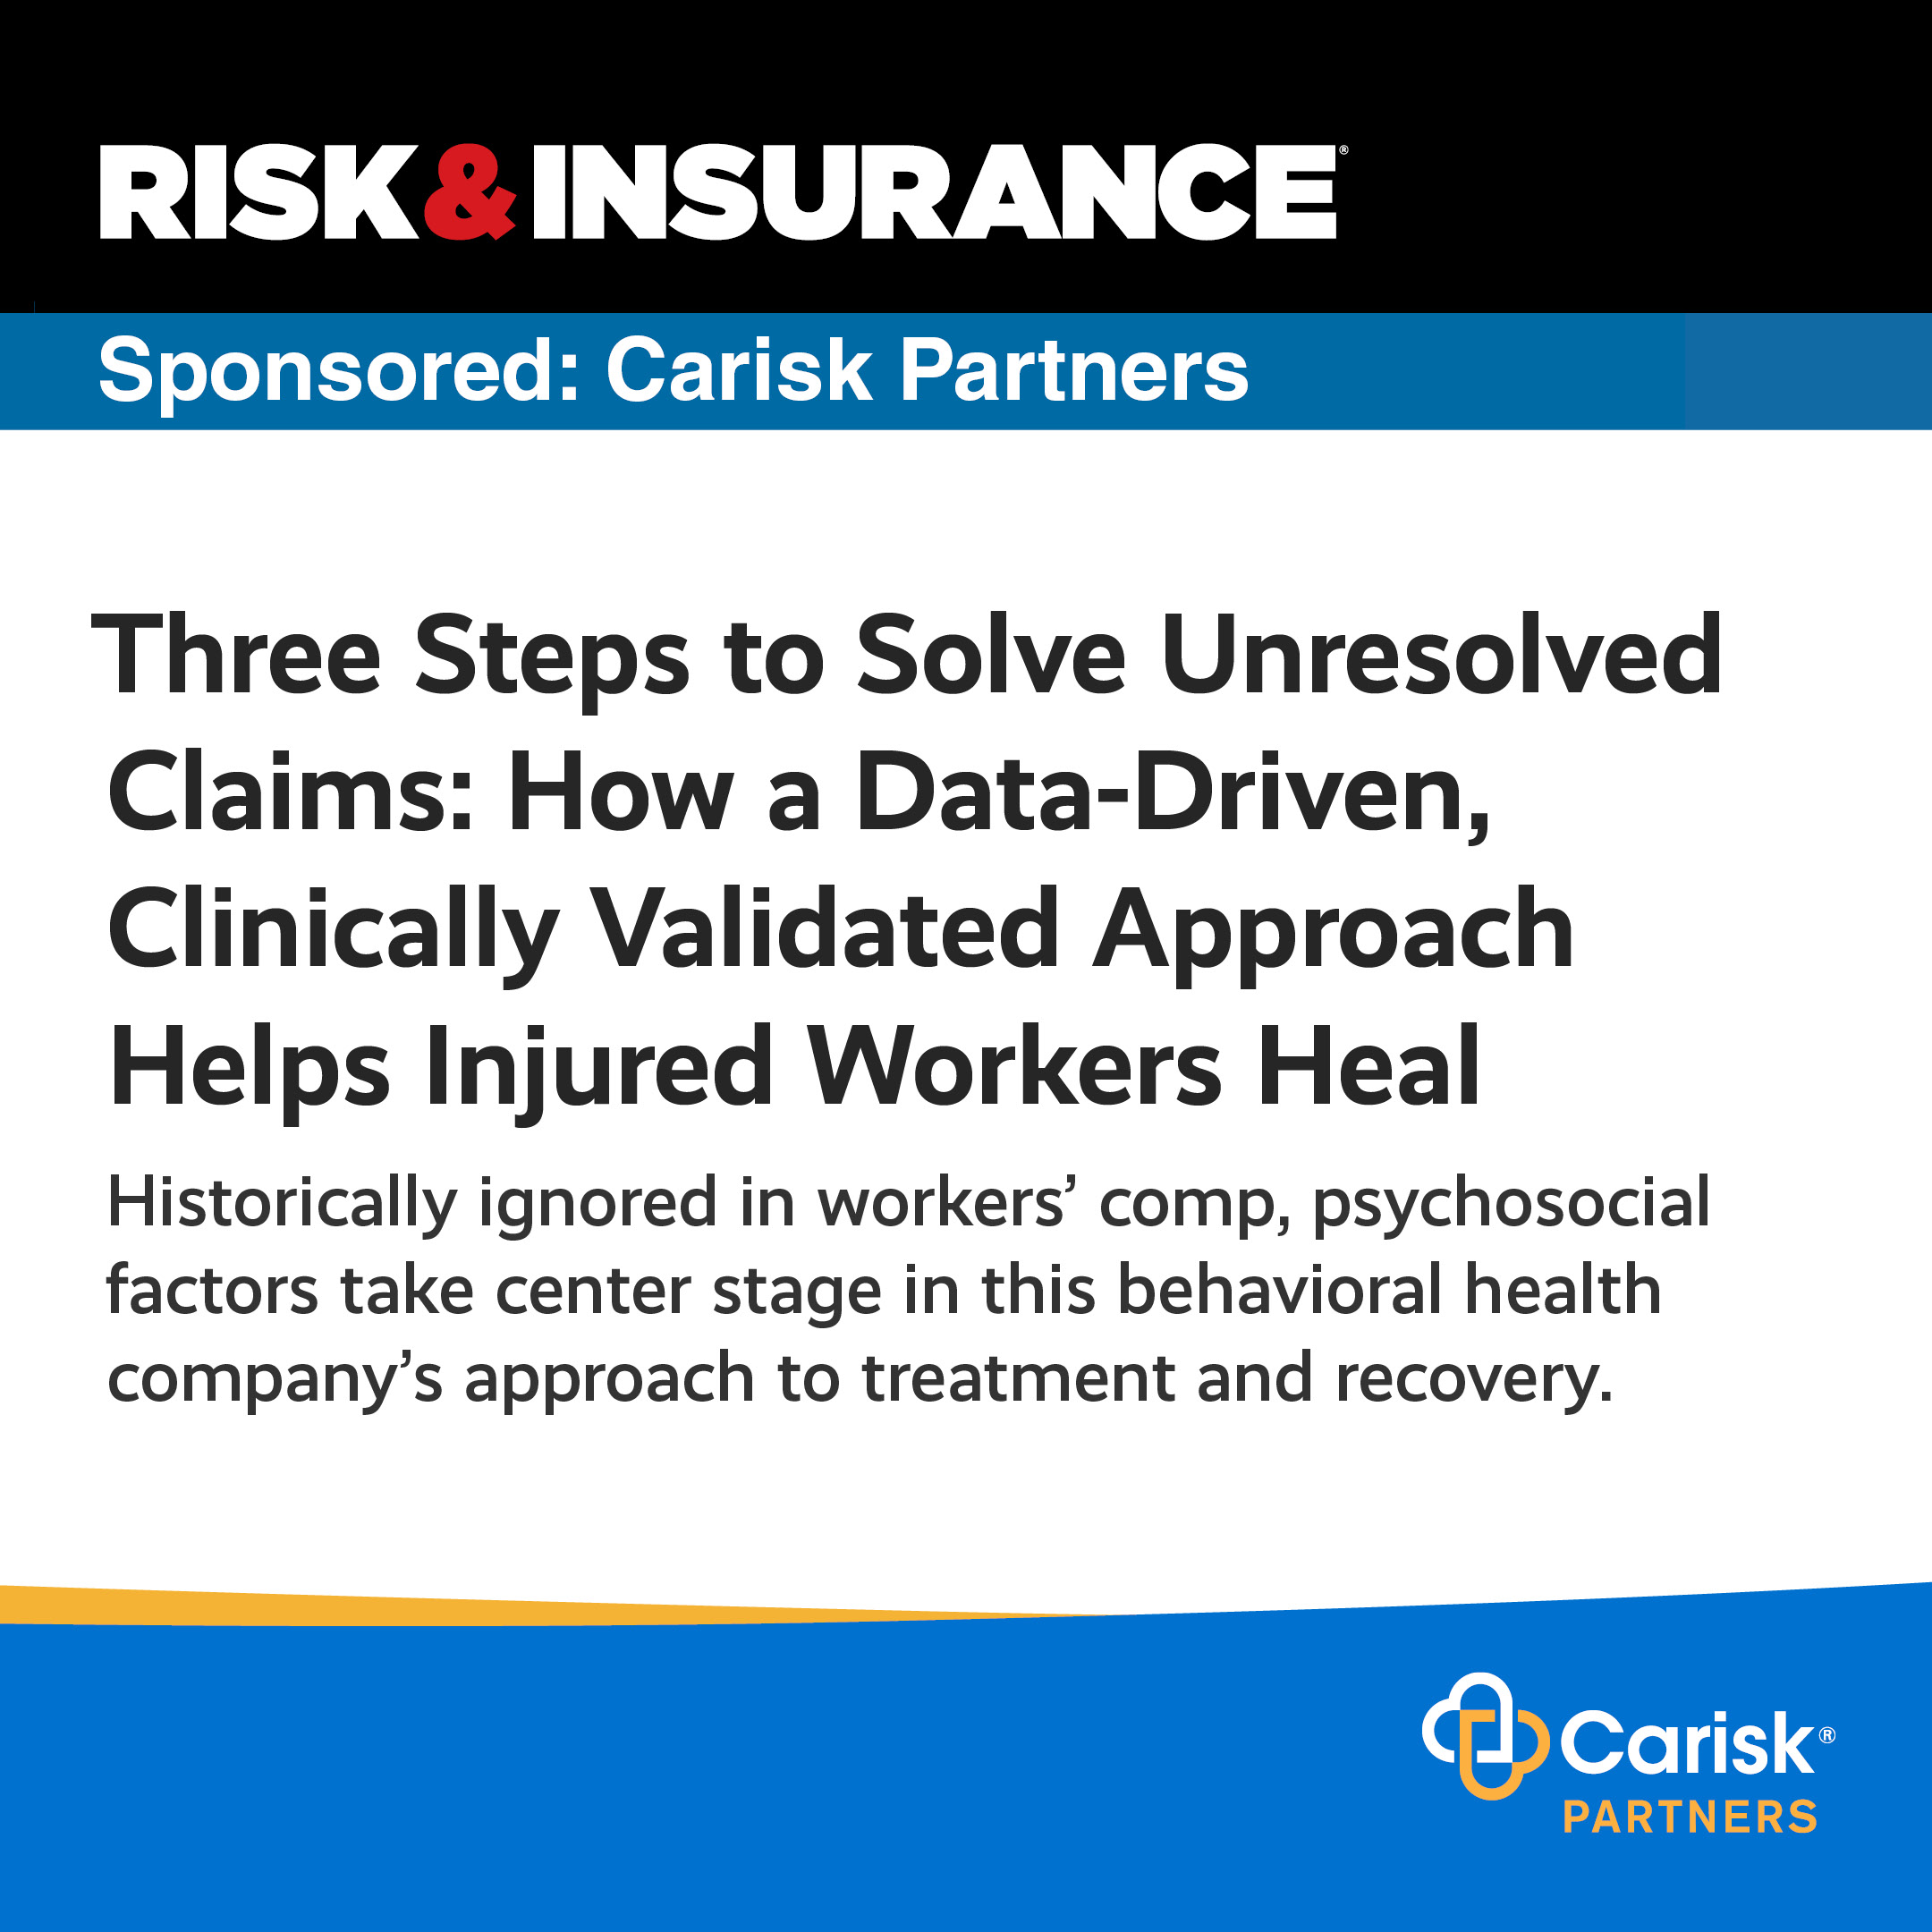 Three Steps to Solve Unresolved Claims: How a Data-Driven, Clinically Validated Approach Helps Injured Workers Heal